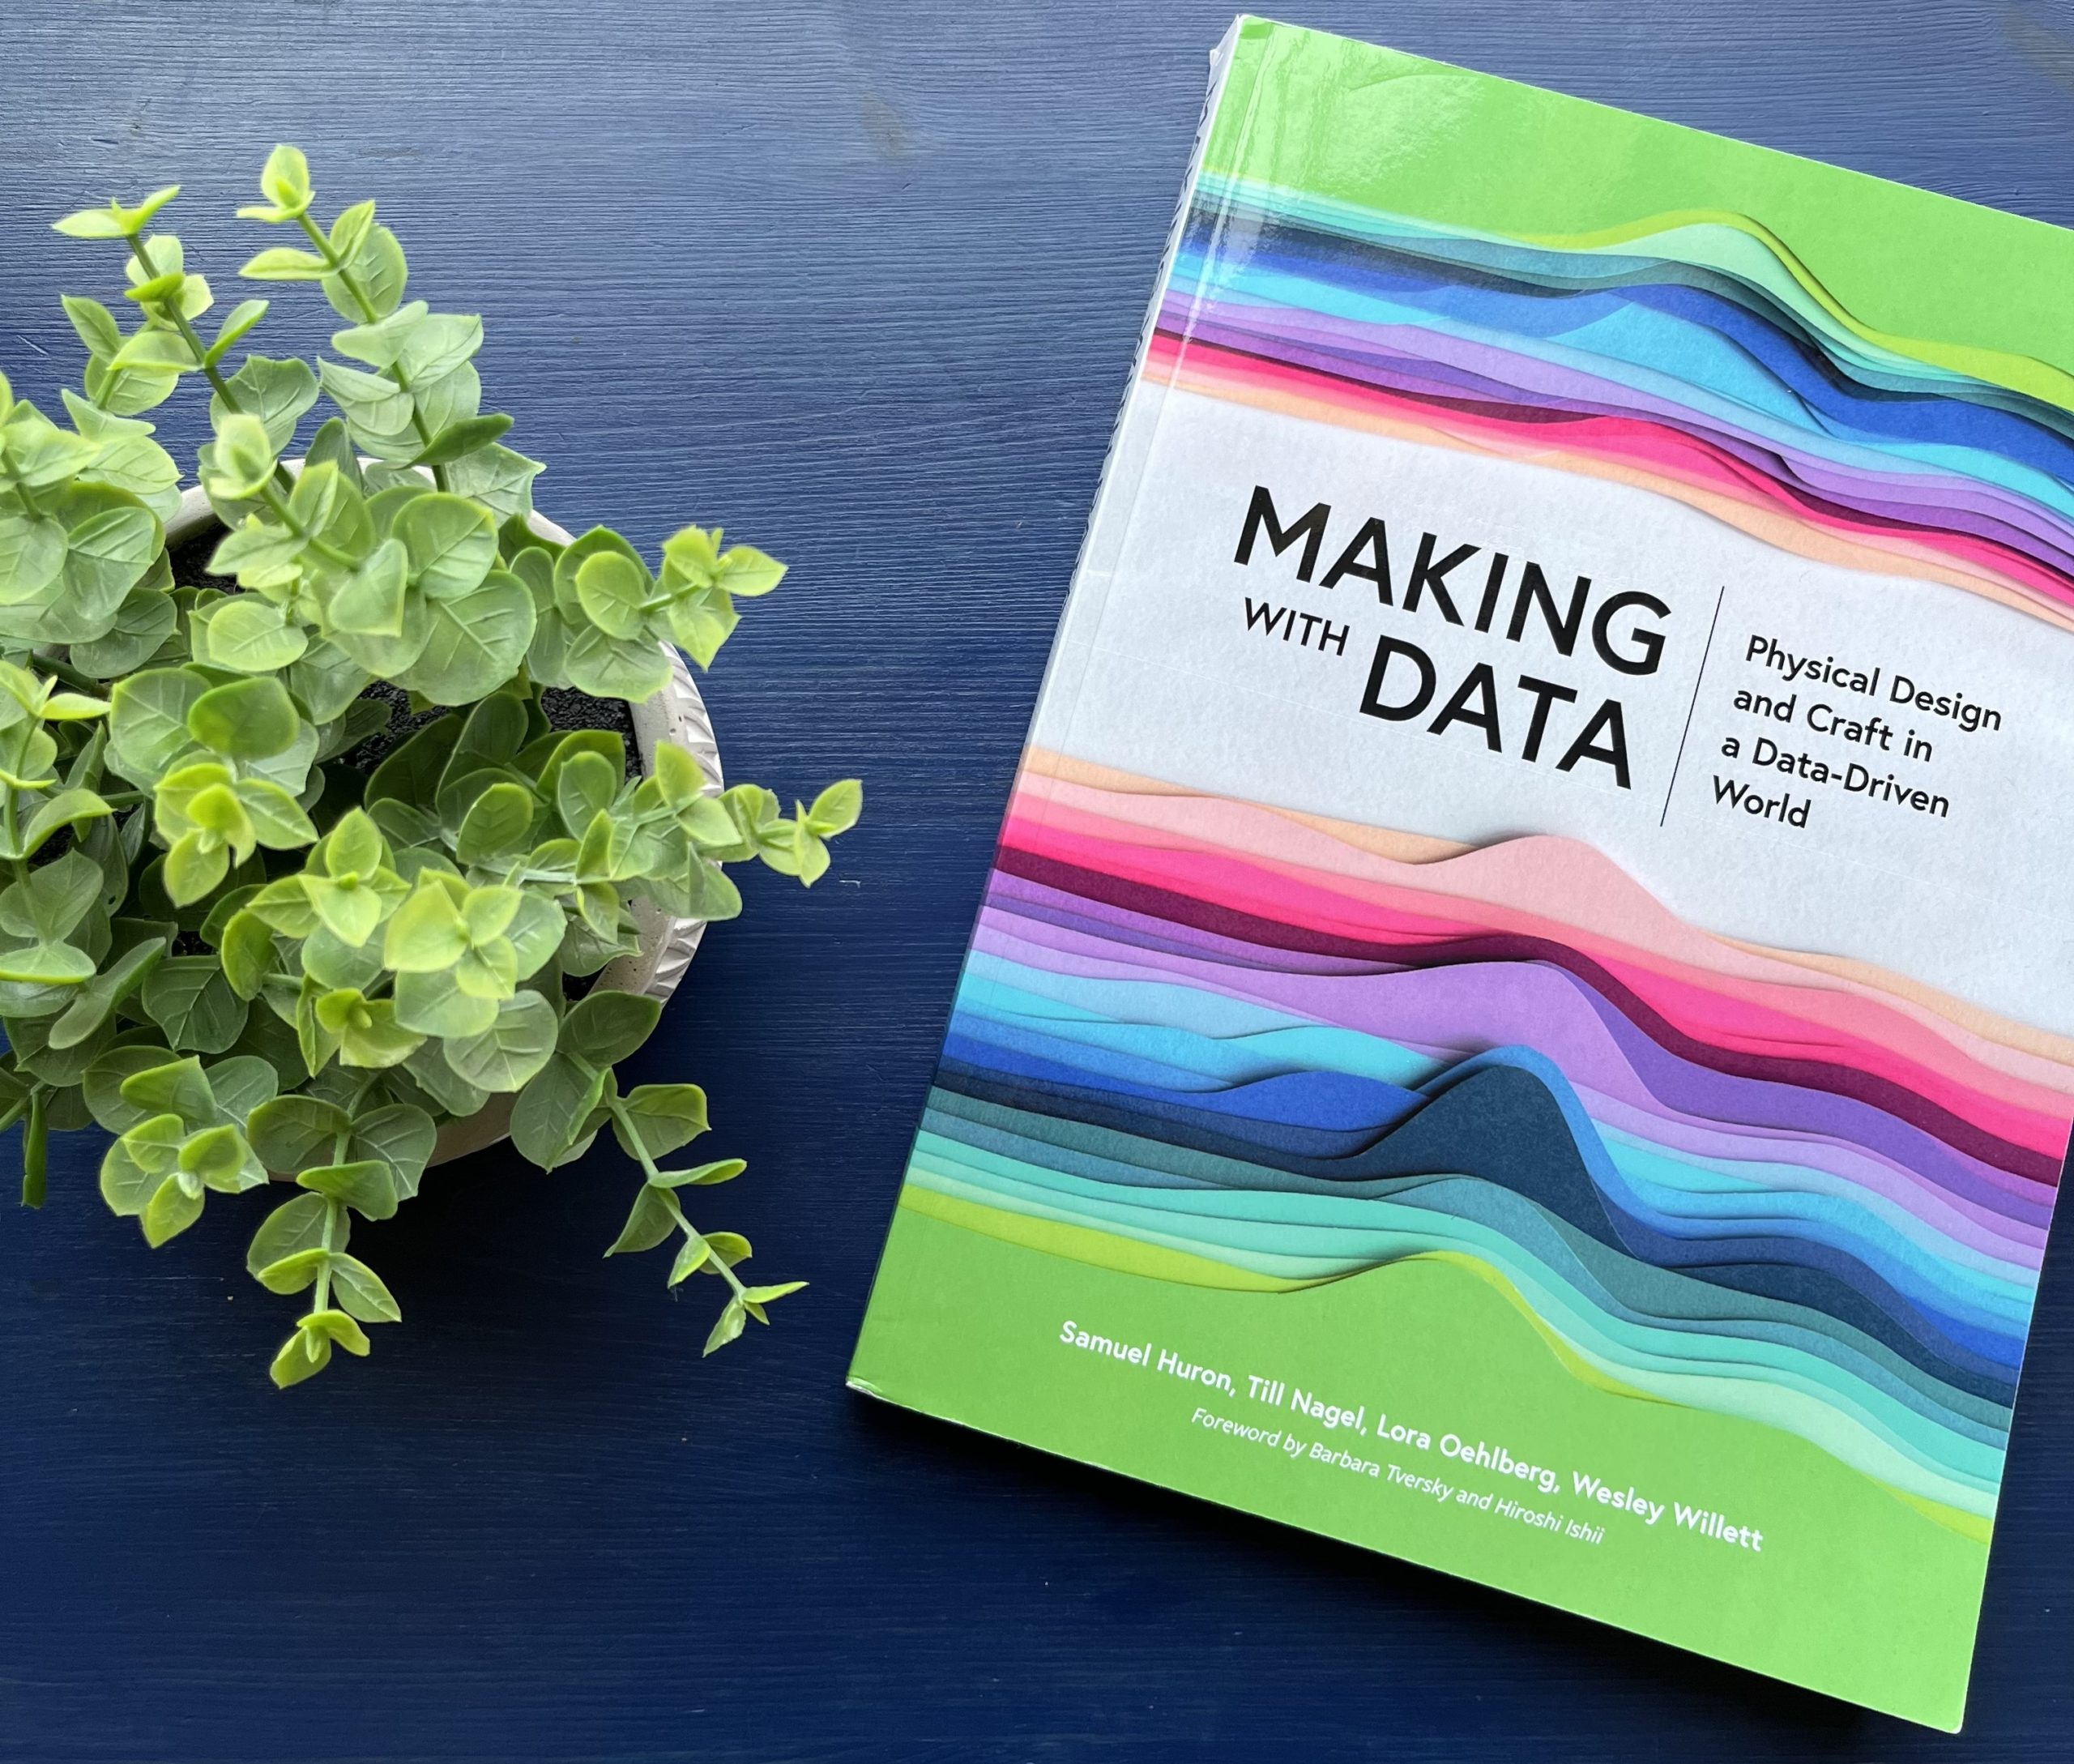 A colorful book sits on a blue table next to a small plant. The book’s cover shows a visualization made of many different colors of paper showing distribution curves. About a third of the way down the cover is the title “Making with Data Physical Design and Craft in a Data-Driven World.”